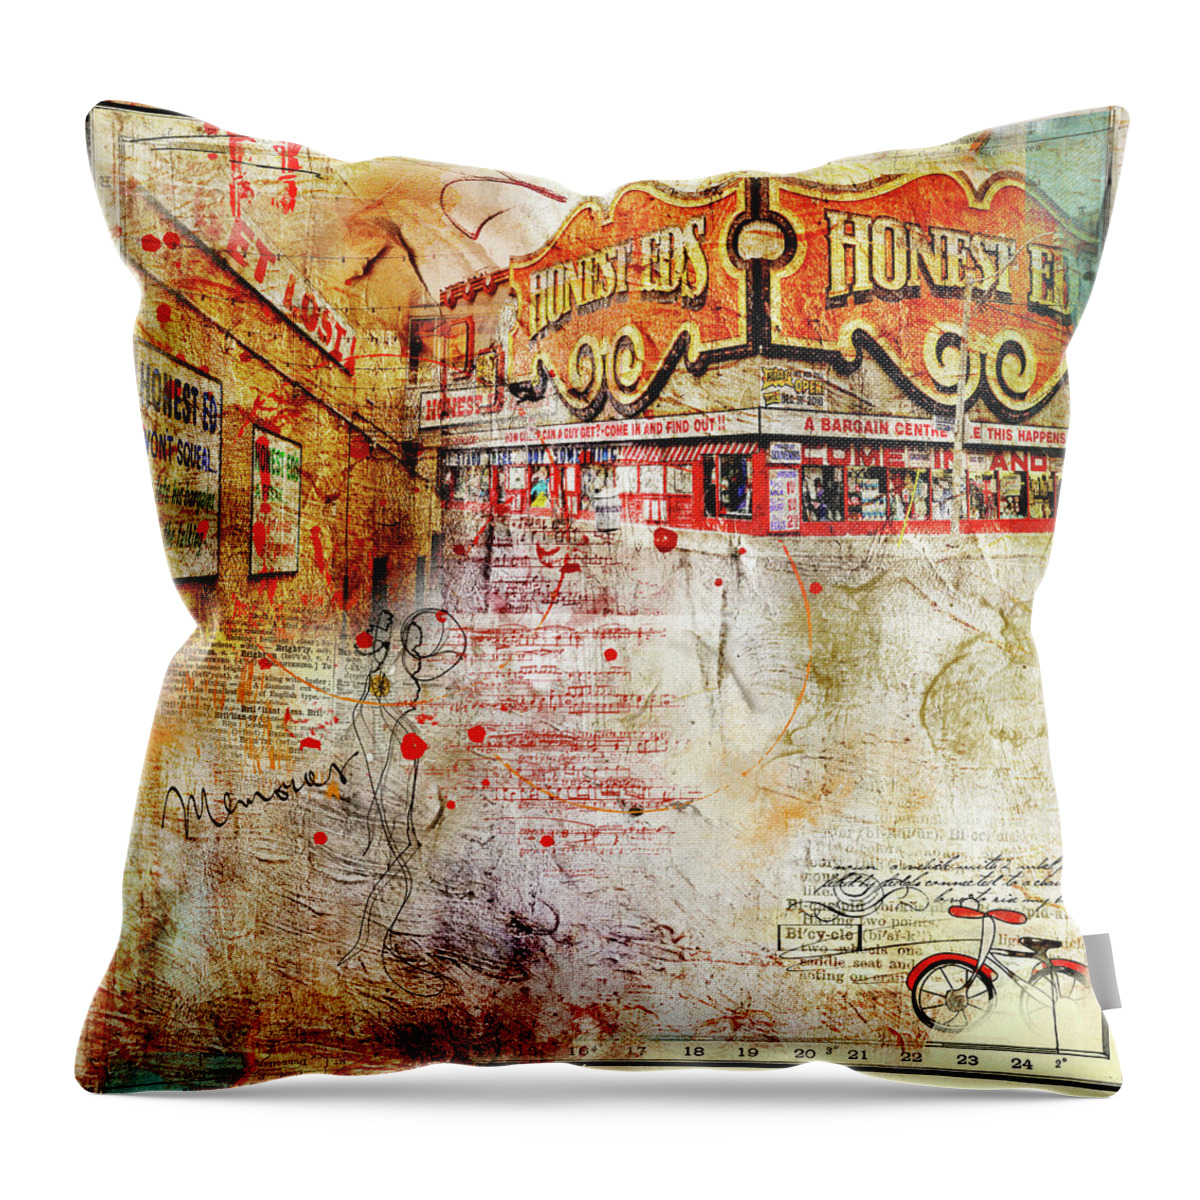 Toronto Throw Pillow featuring the digital art Goodbye Honest Eds II by Nicky Jameson